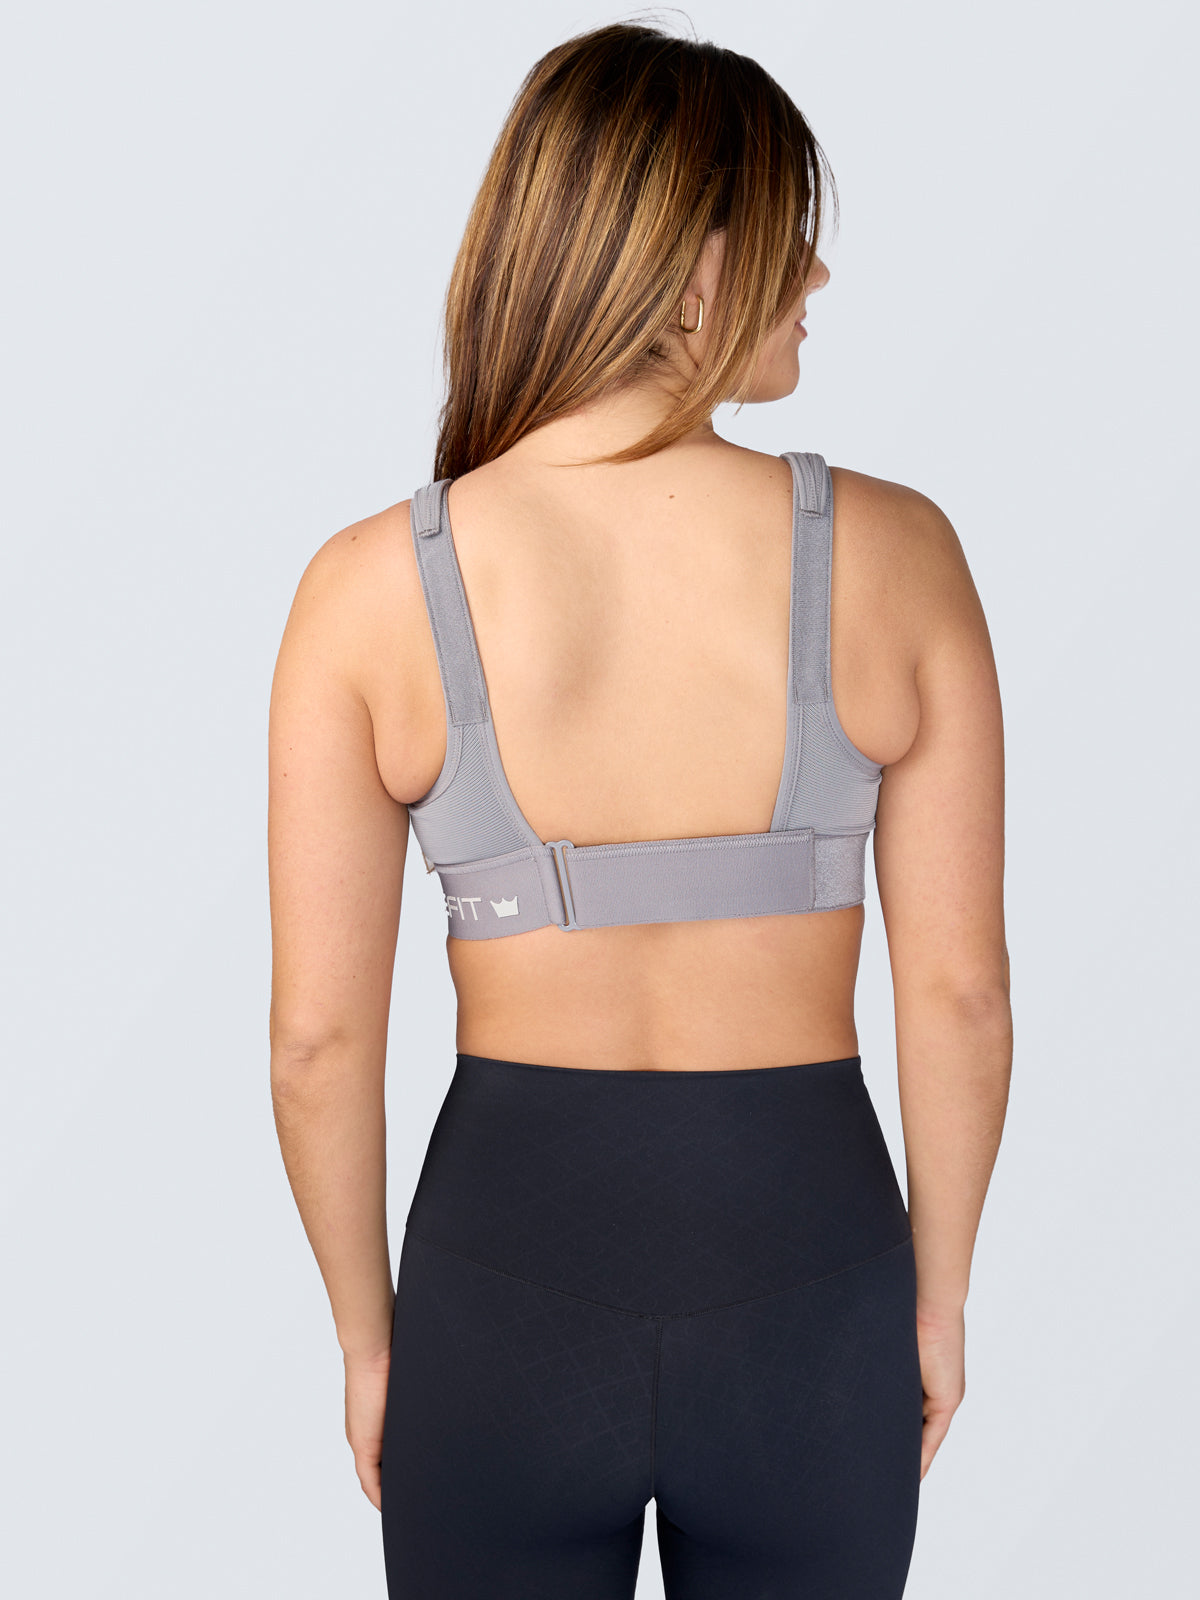 SHEFIT - I'm absolutely in love with the Ultimate Sports Bras, and  Confident has to be my favorite because of the color! I wouldn't recommend  doing any type of high impact activities